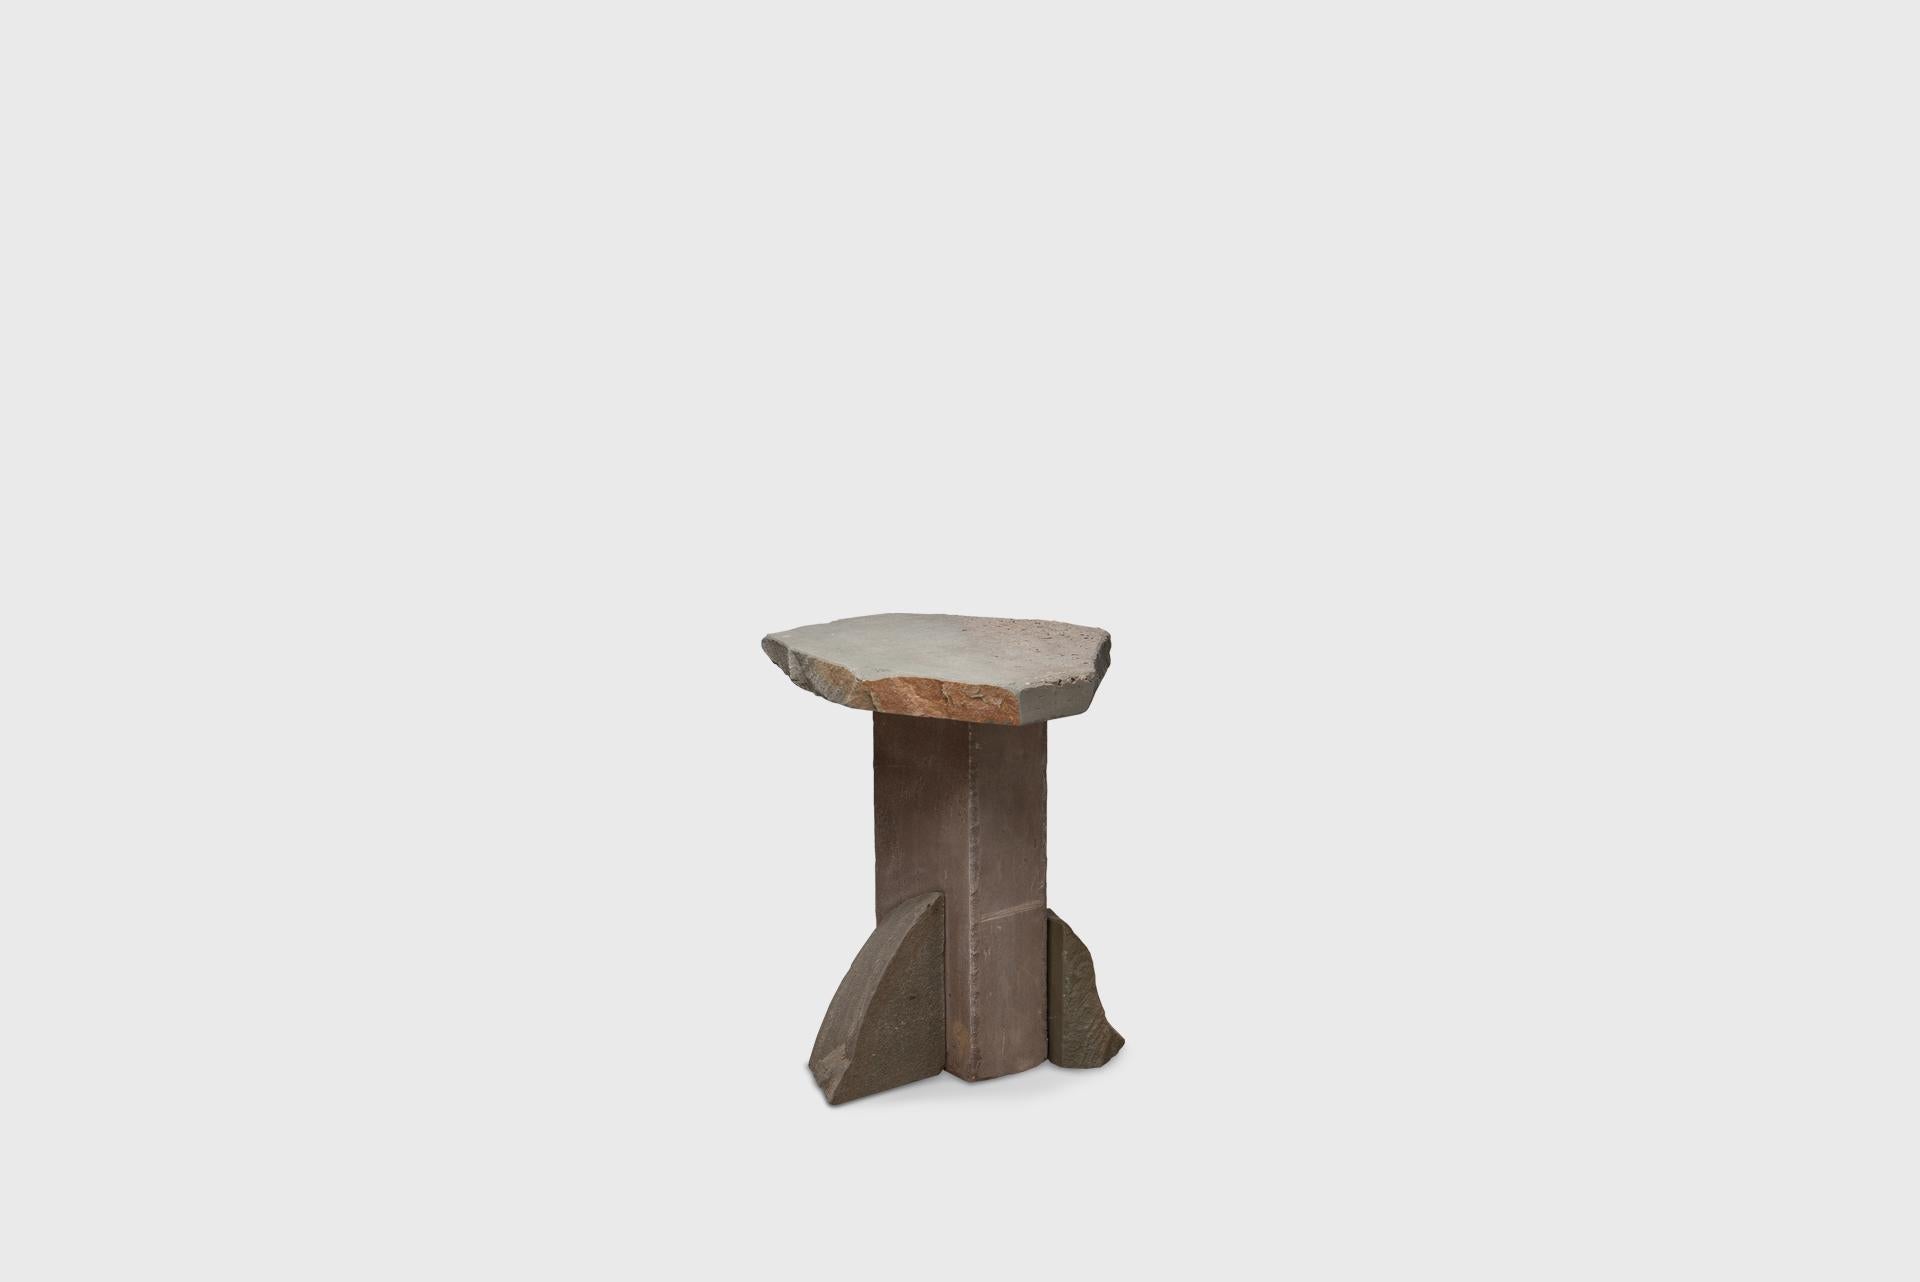 Contemporary Side Table 1, Graywacke Offcut Gray Stone, Carsten in Der Elst For Sale 3